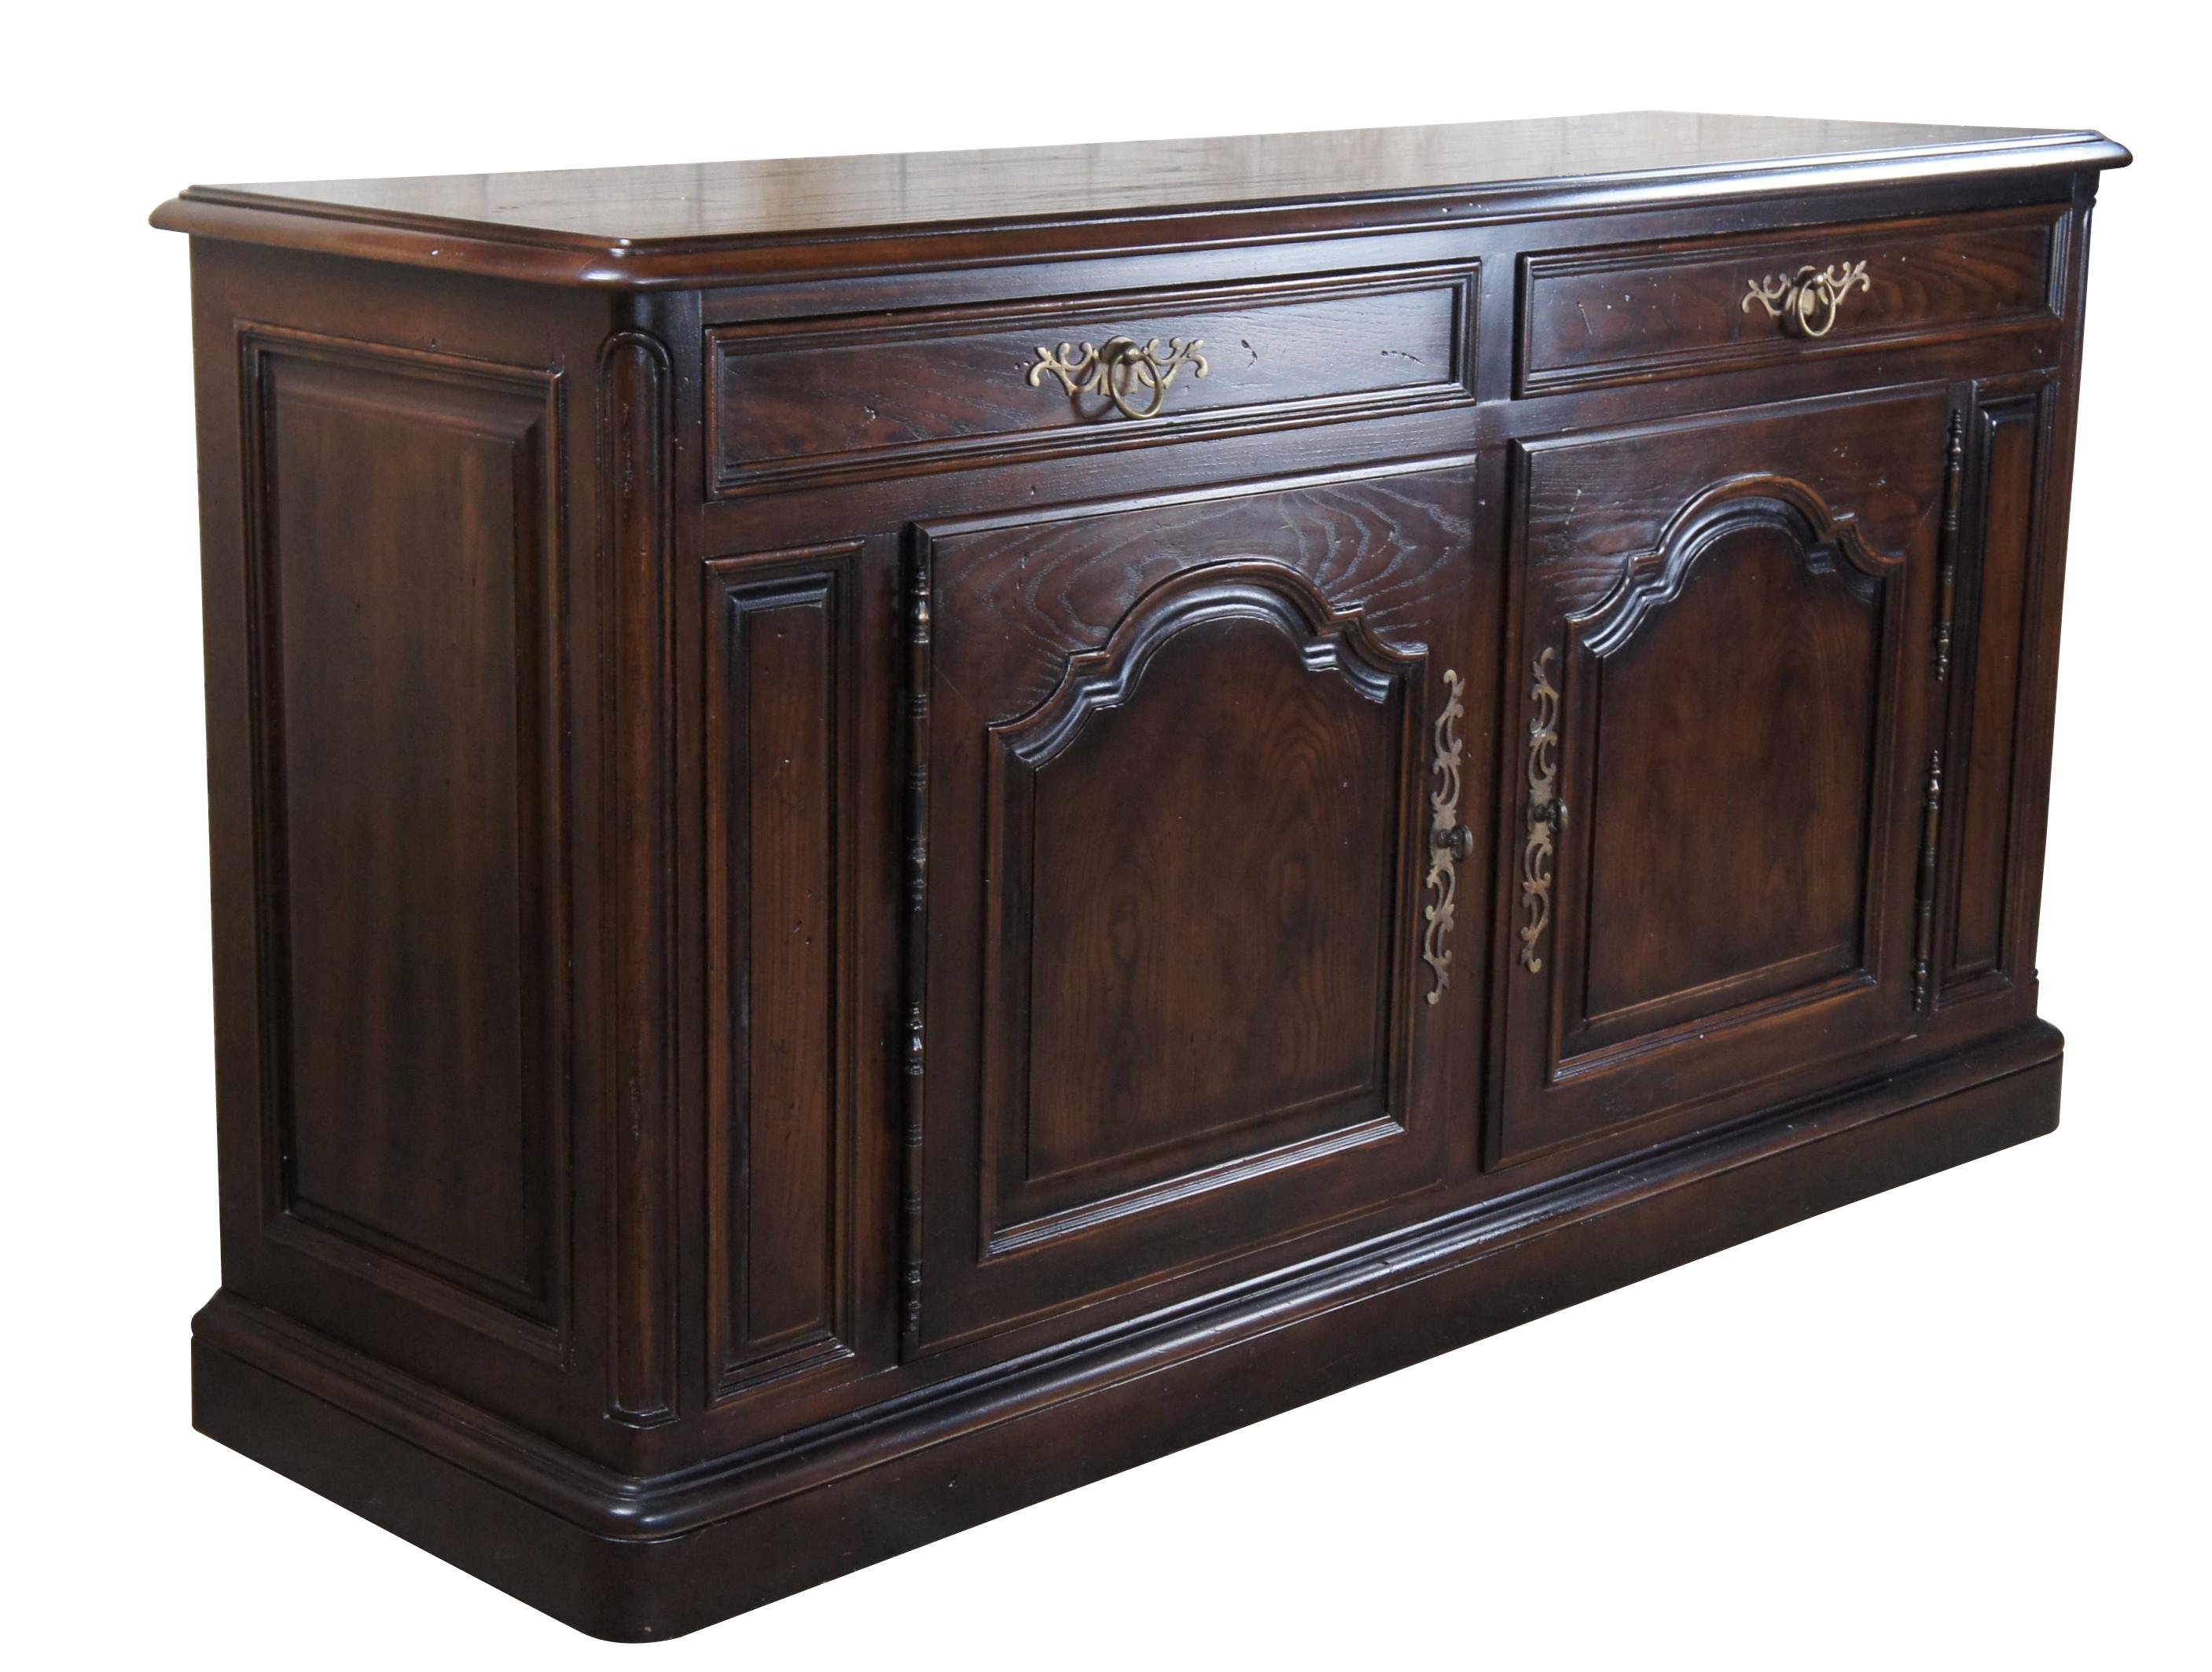 Henredon Four Centuries collection Country French bar cabinet or server, circa 1970s. features a rectangular frame made from oak with two large dovetailed drawers over a lower cabinet with shelf.  Includes paneled accents and ornate scrolled brass